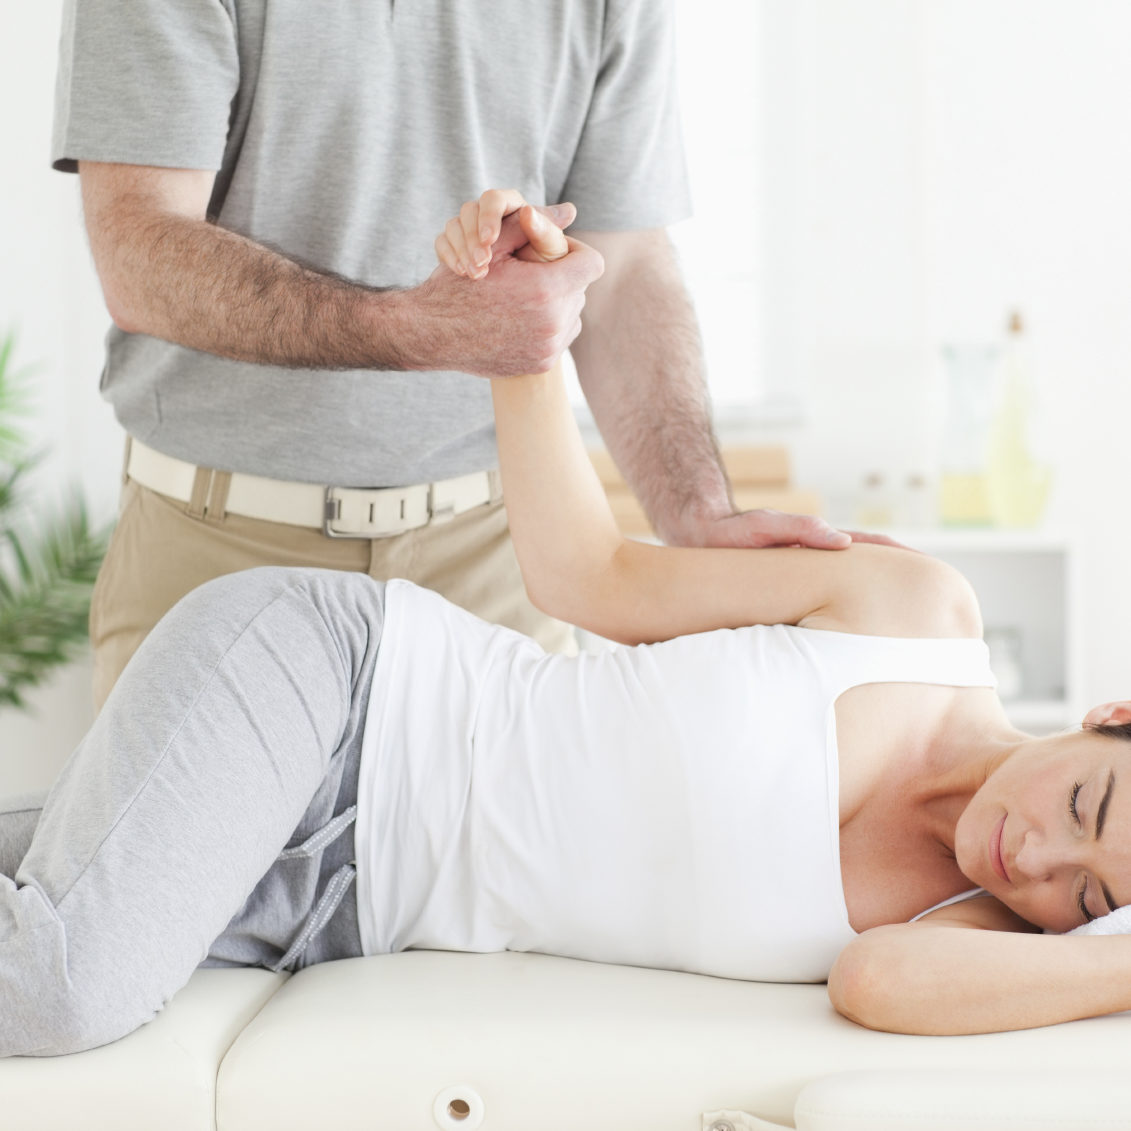 A chiropractor stretches a female customer's arm in his surgery